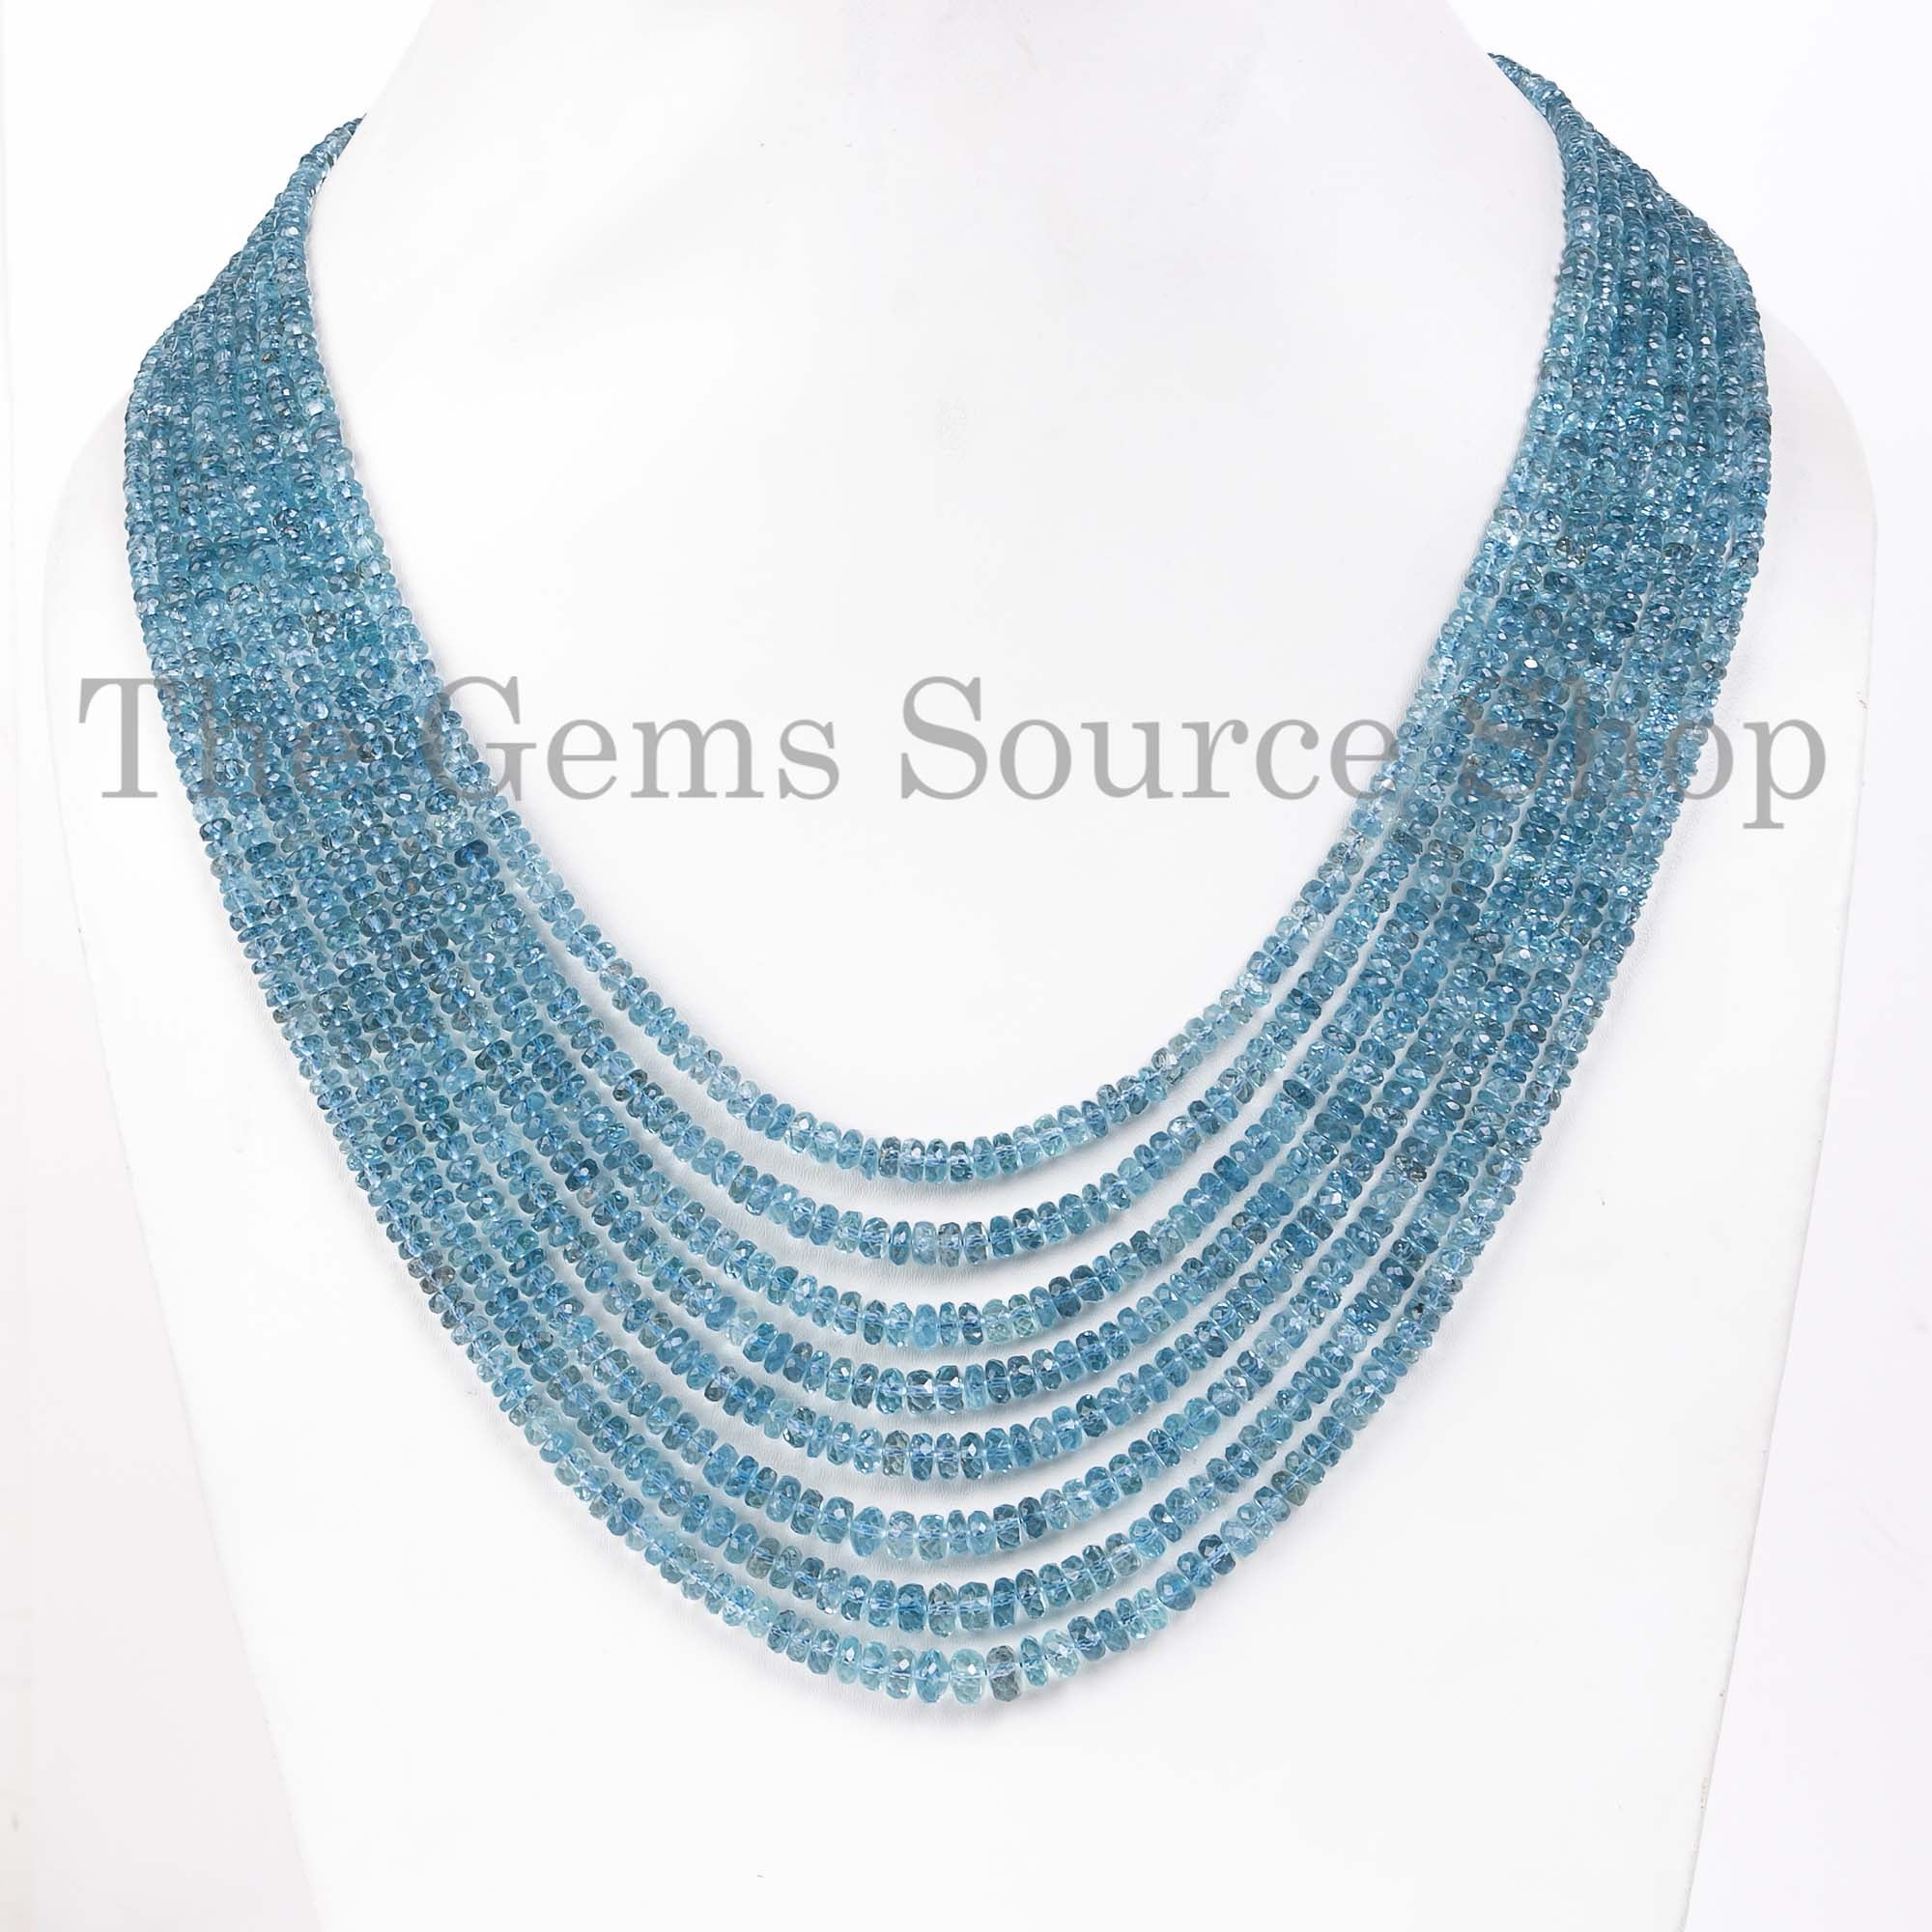 8 Lines Santa Maria Aquamarine Beads Necklace, Faceted Rondelle Beads Necklace, AAA Quality Gemstone Jewelry